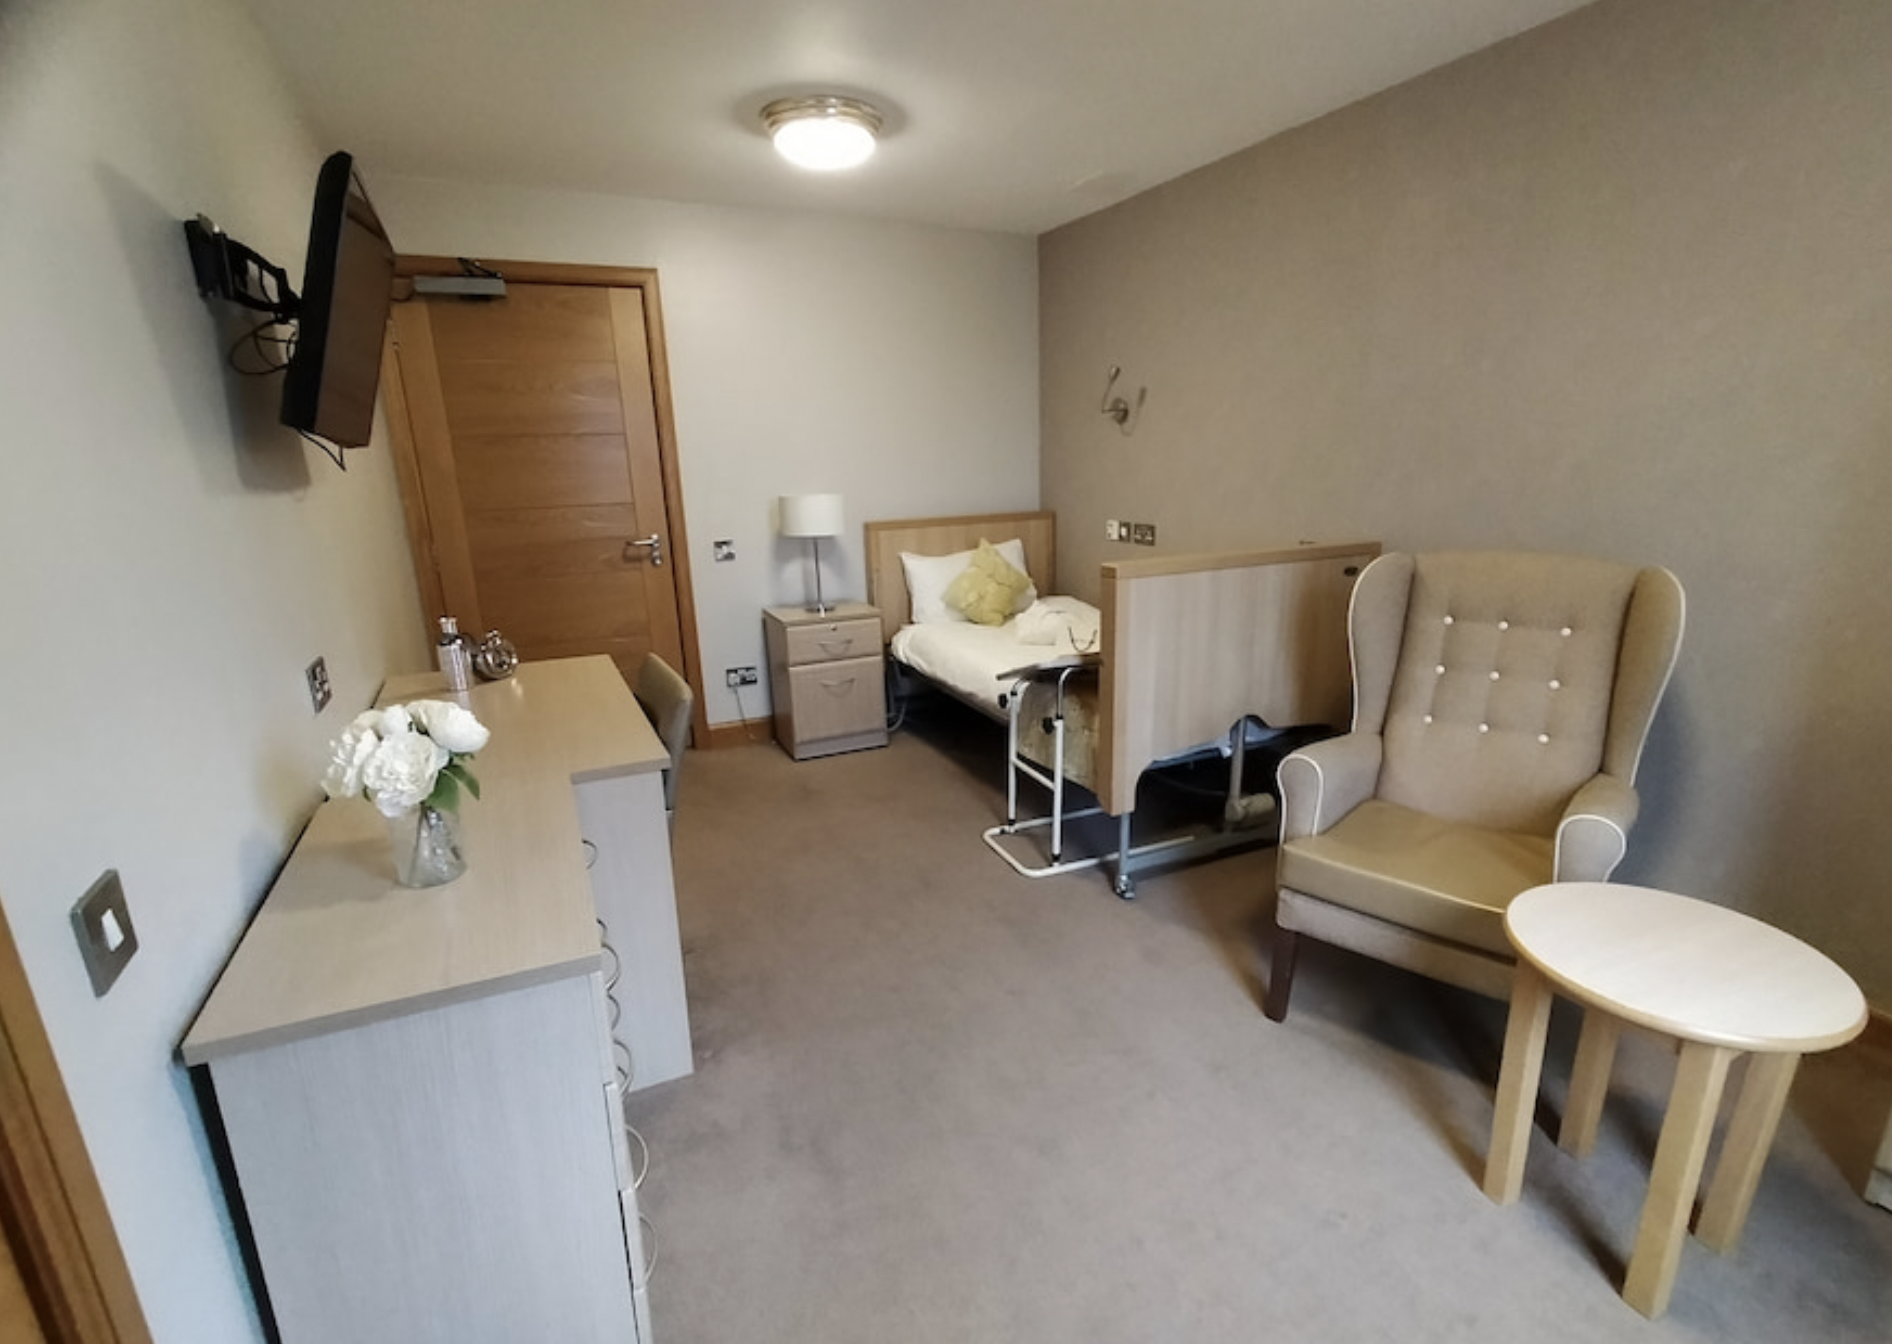 Independent Care Home - Deeside care home 9